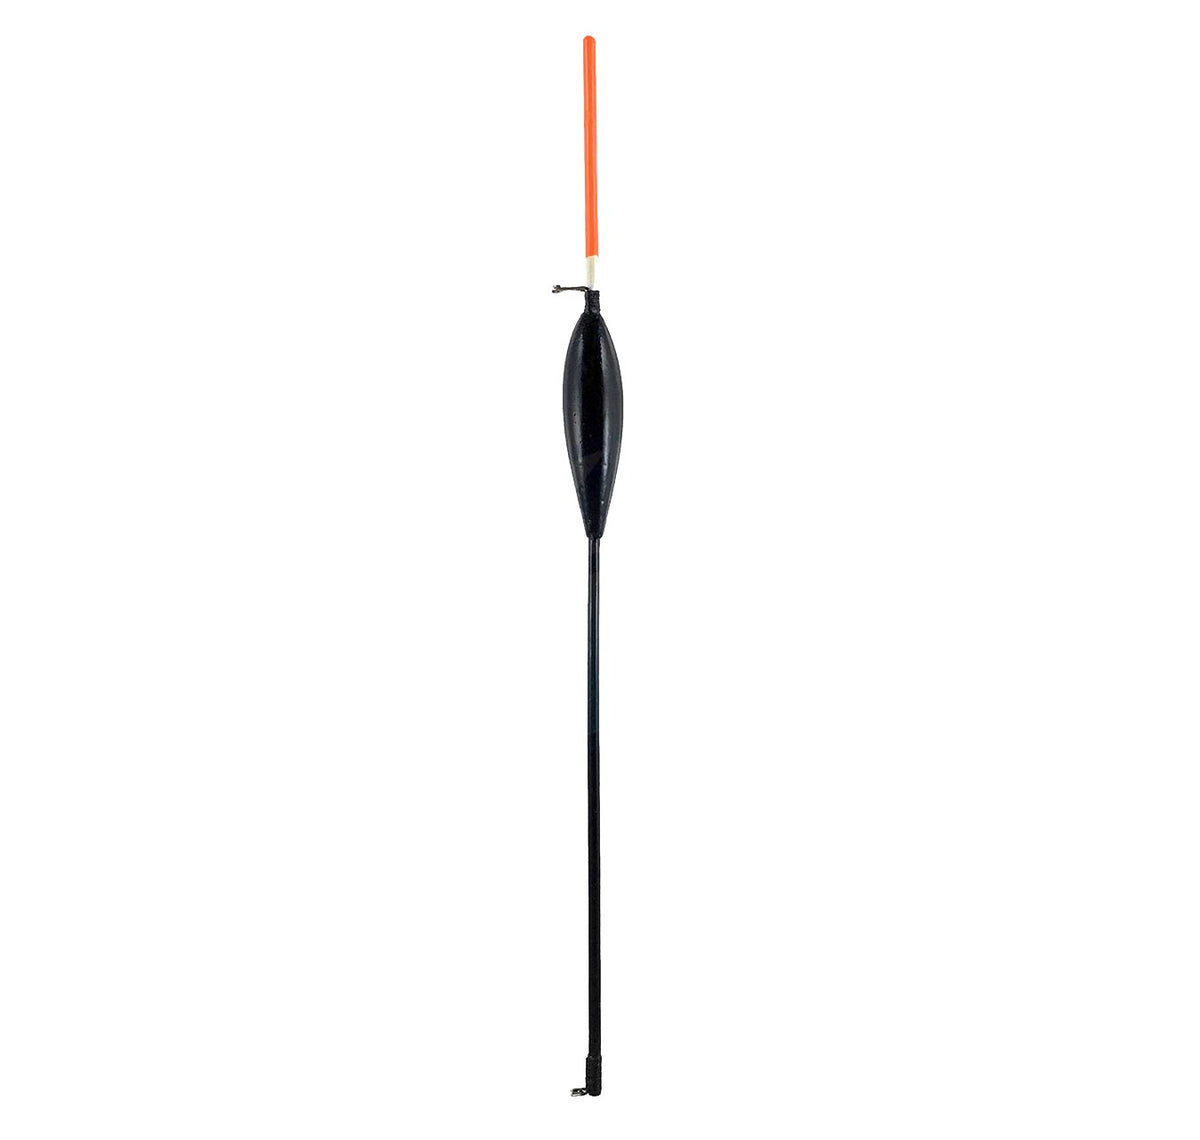 Blackfish River Float - Balsa Weighted